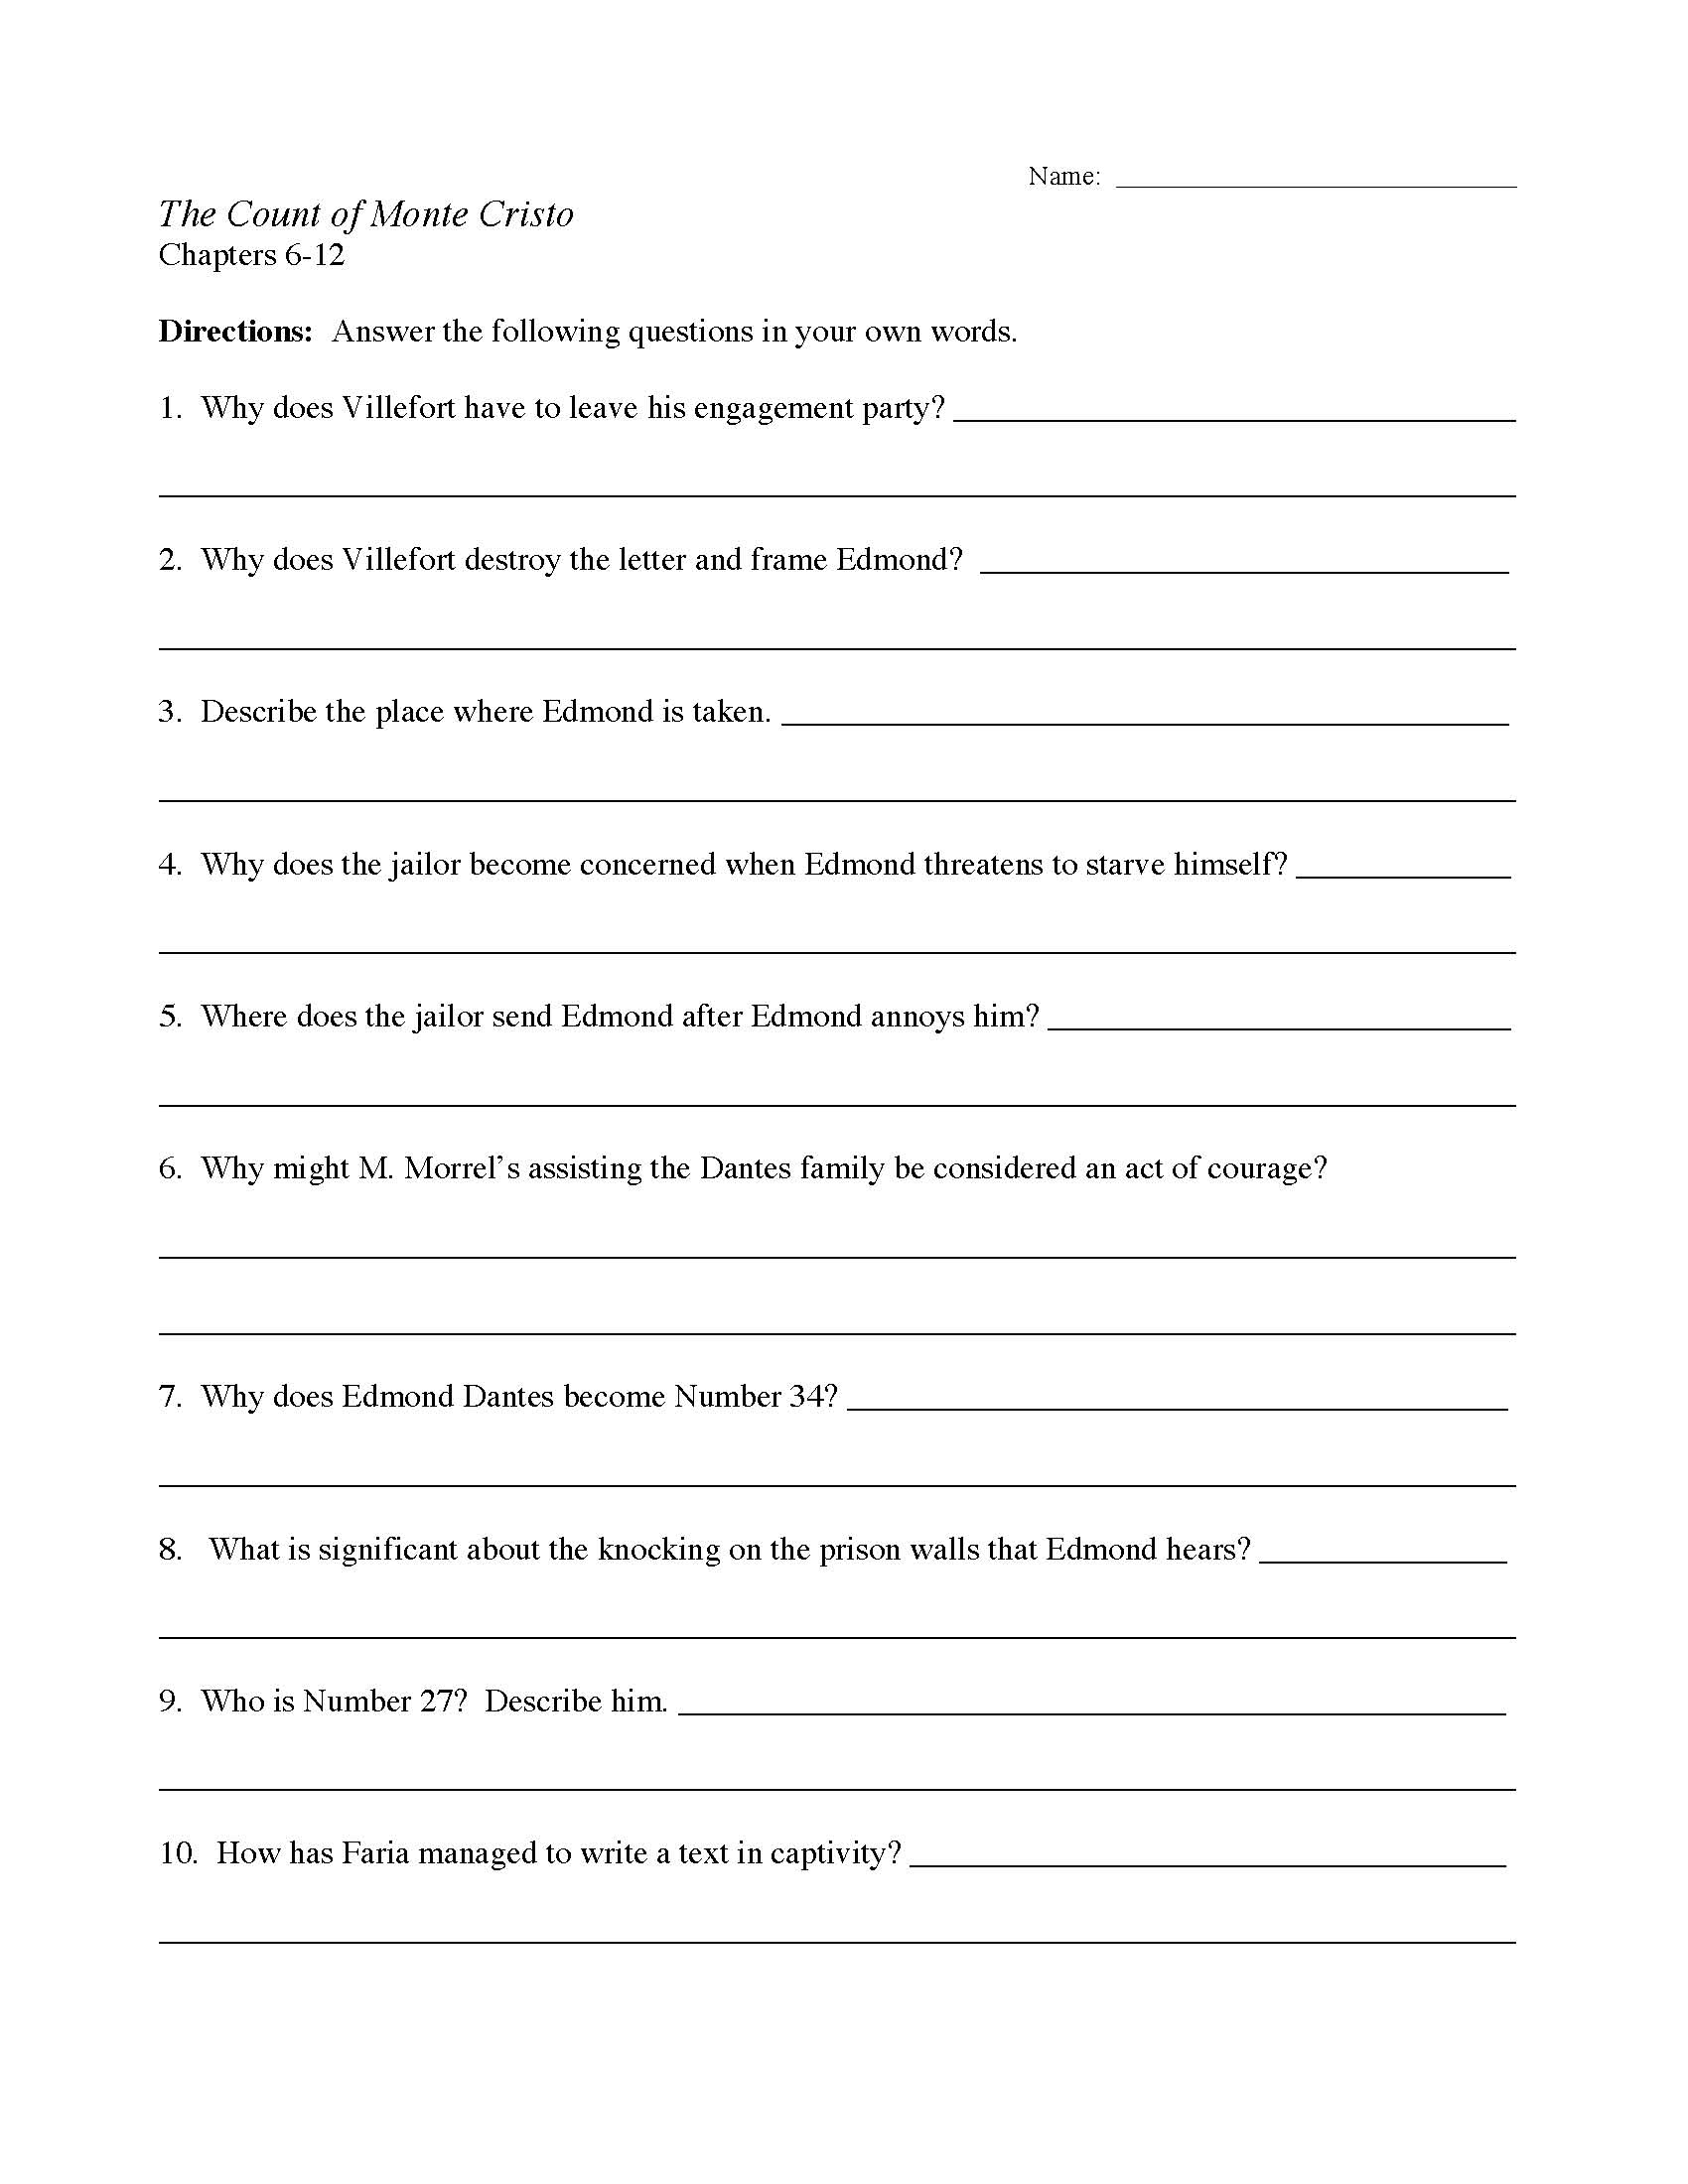 This is a preview image of the The Count of Monte Cristo Chapters 6-12 Worksheet.